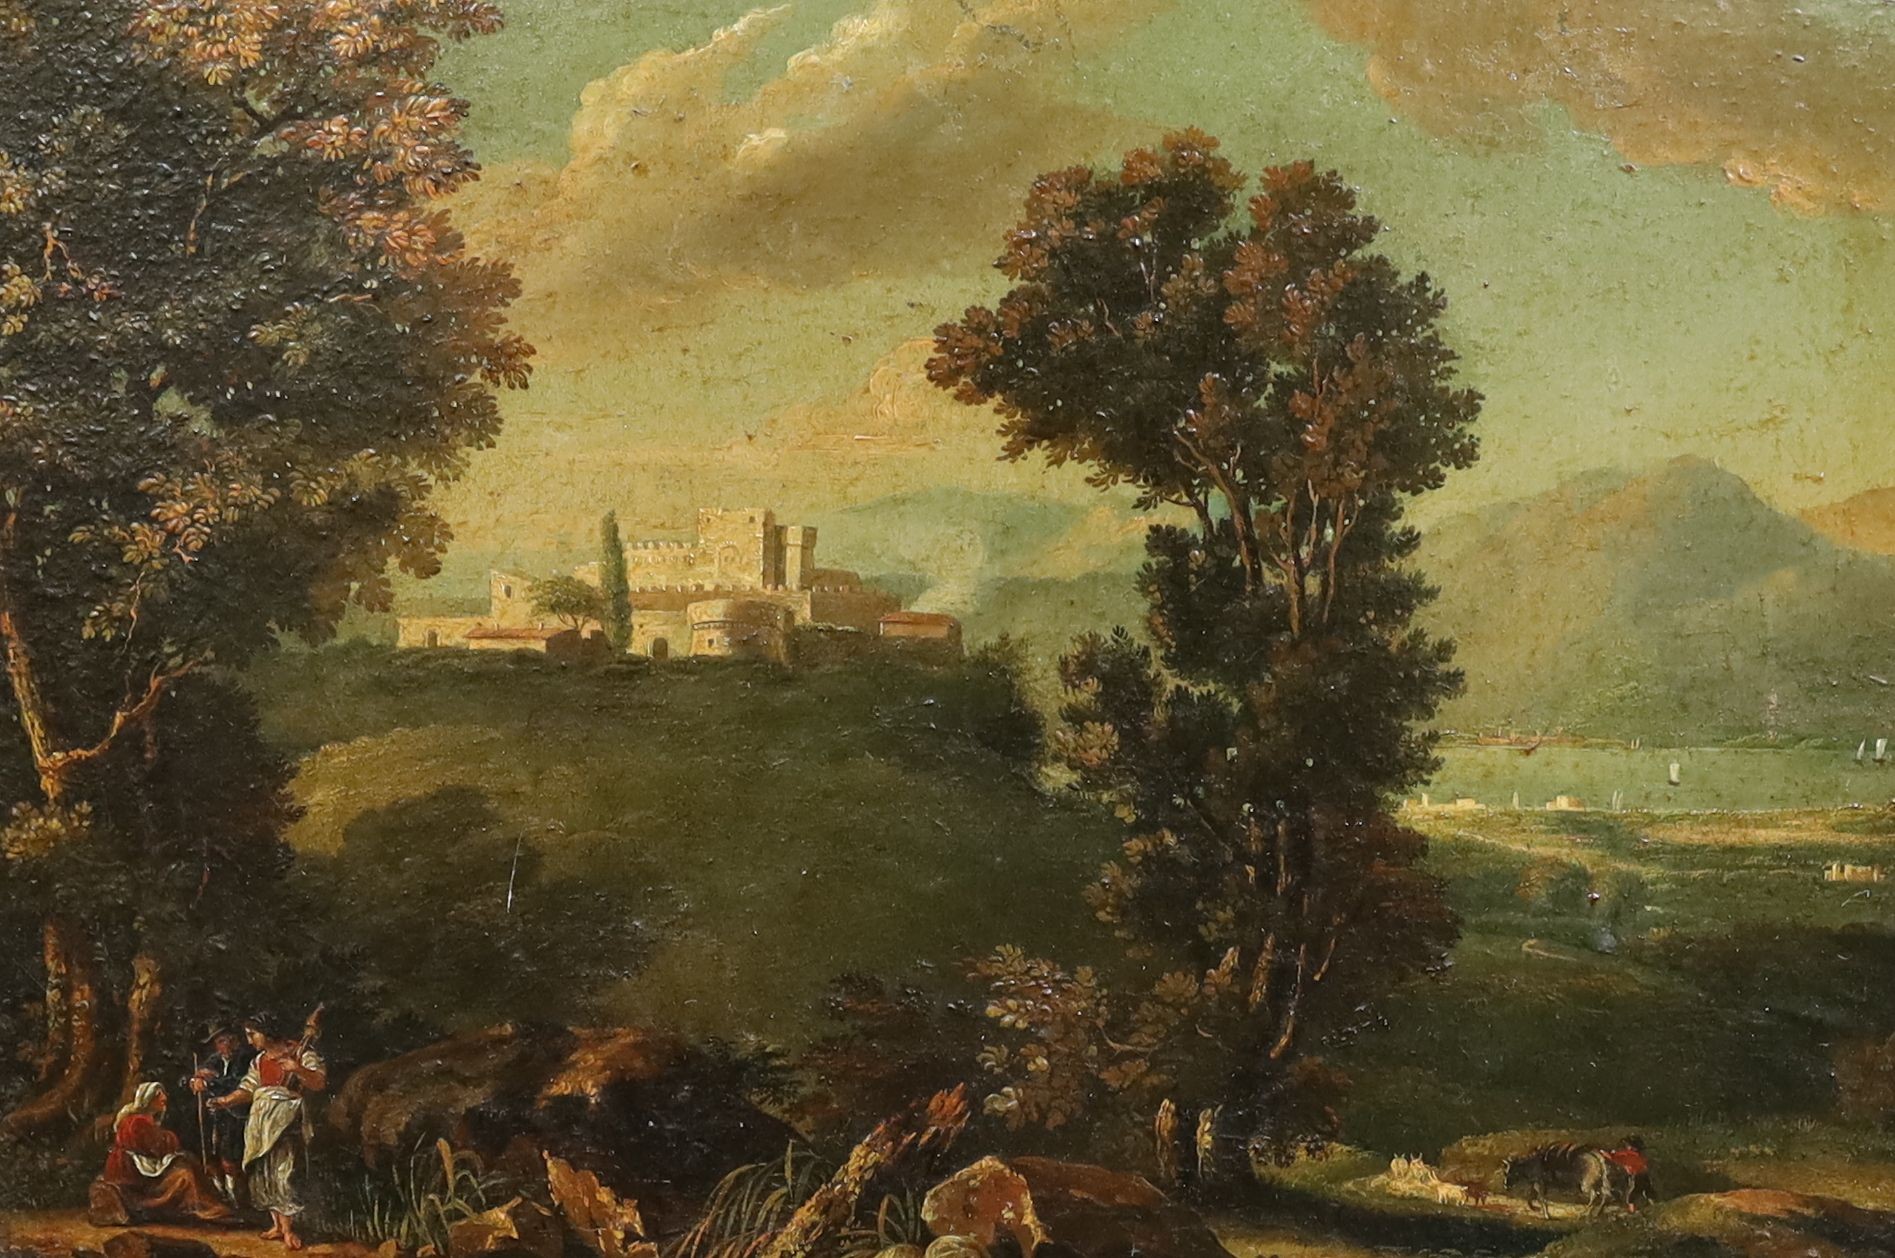 Early 19th century Italian School, Figures in a landscape with castle beyond, oil on canvas, 24 x 34.5cm